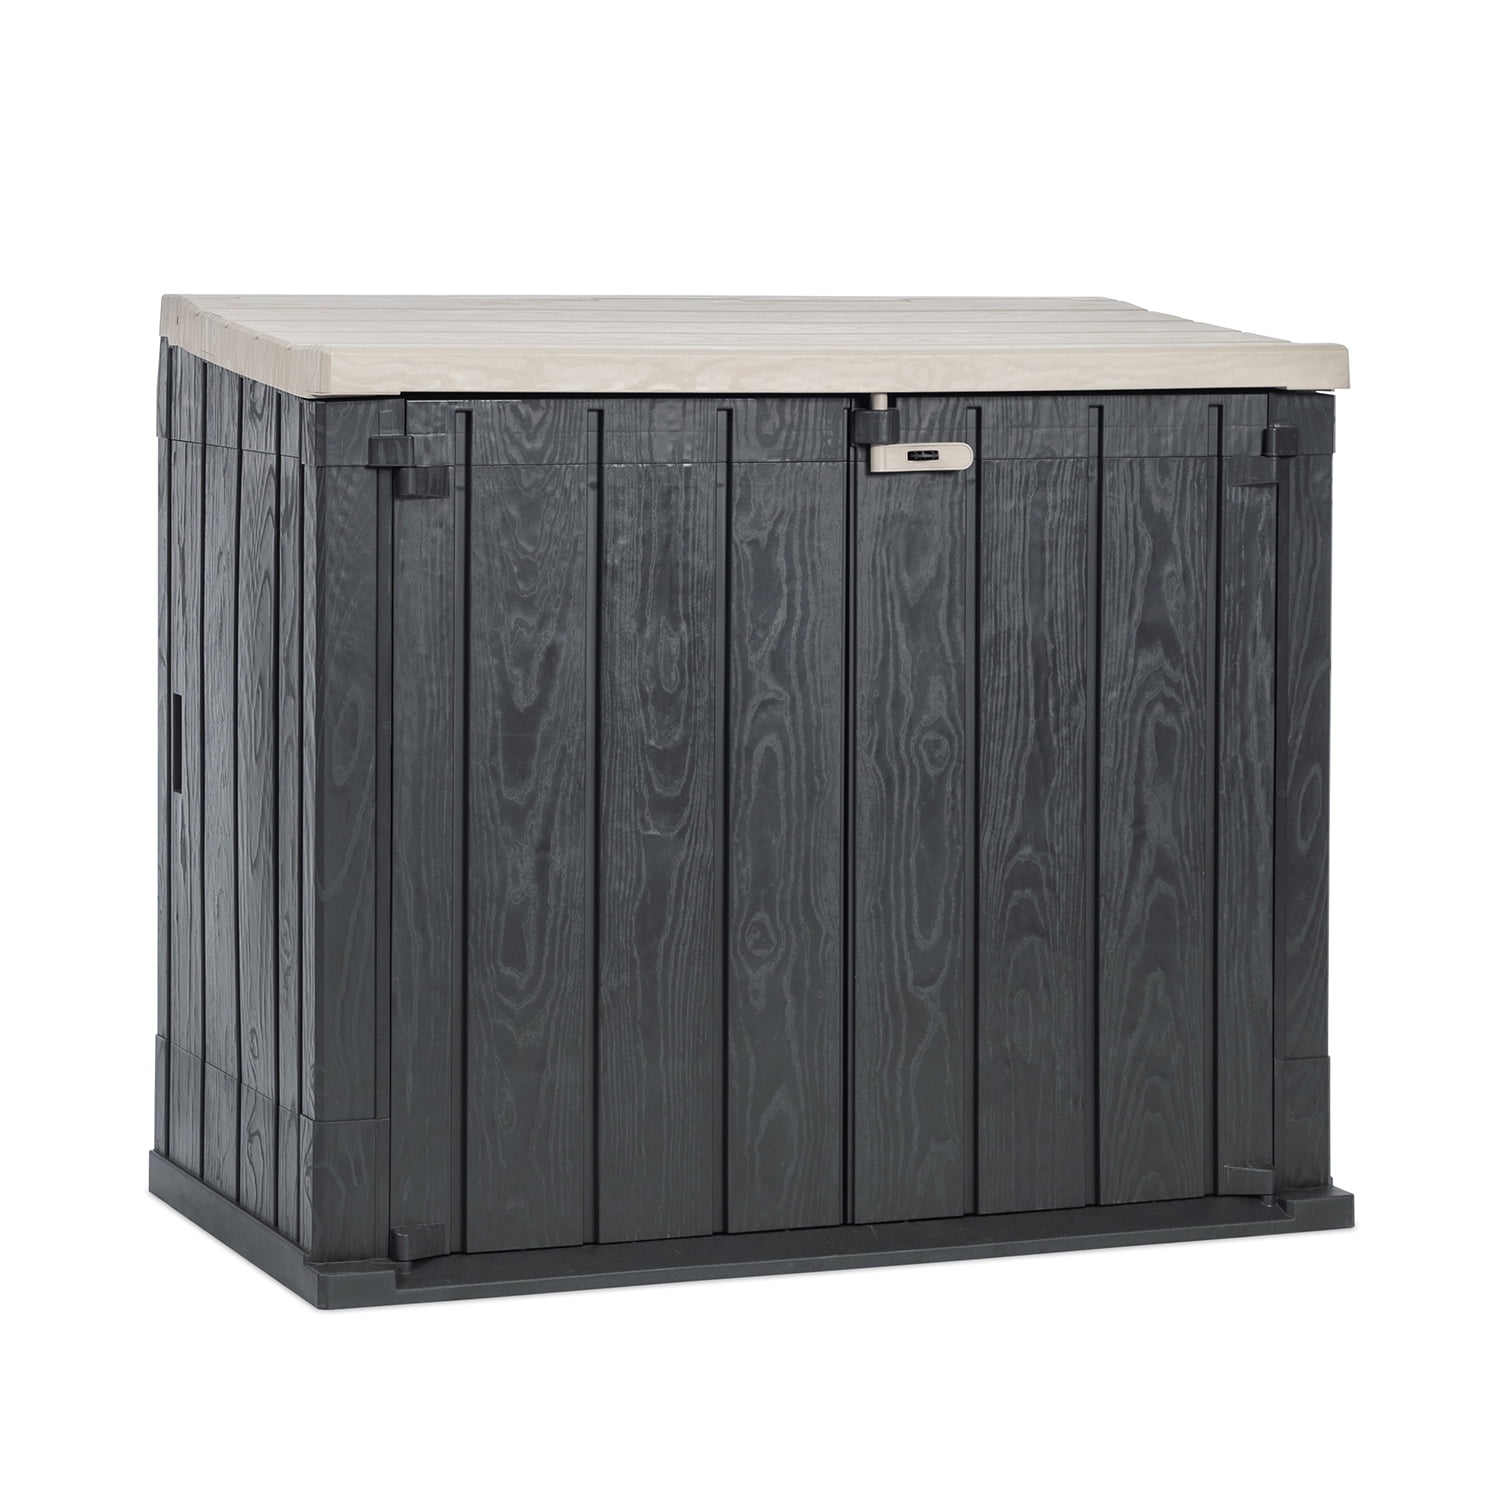 Grey KETER Patio Store 4.6 x 2.5 Foot Resin Outdoor Storage Shed 